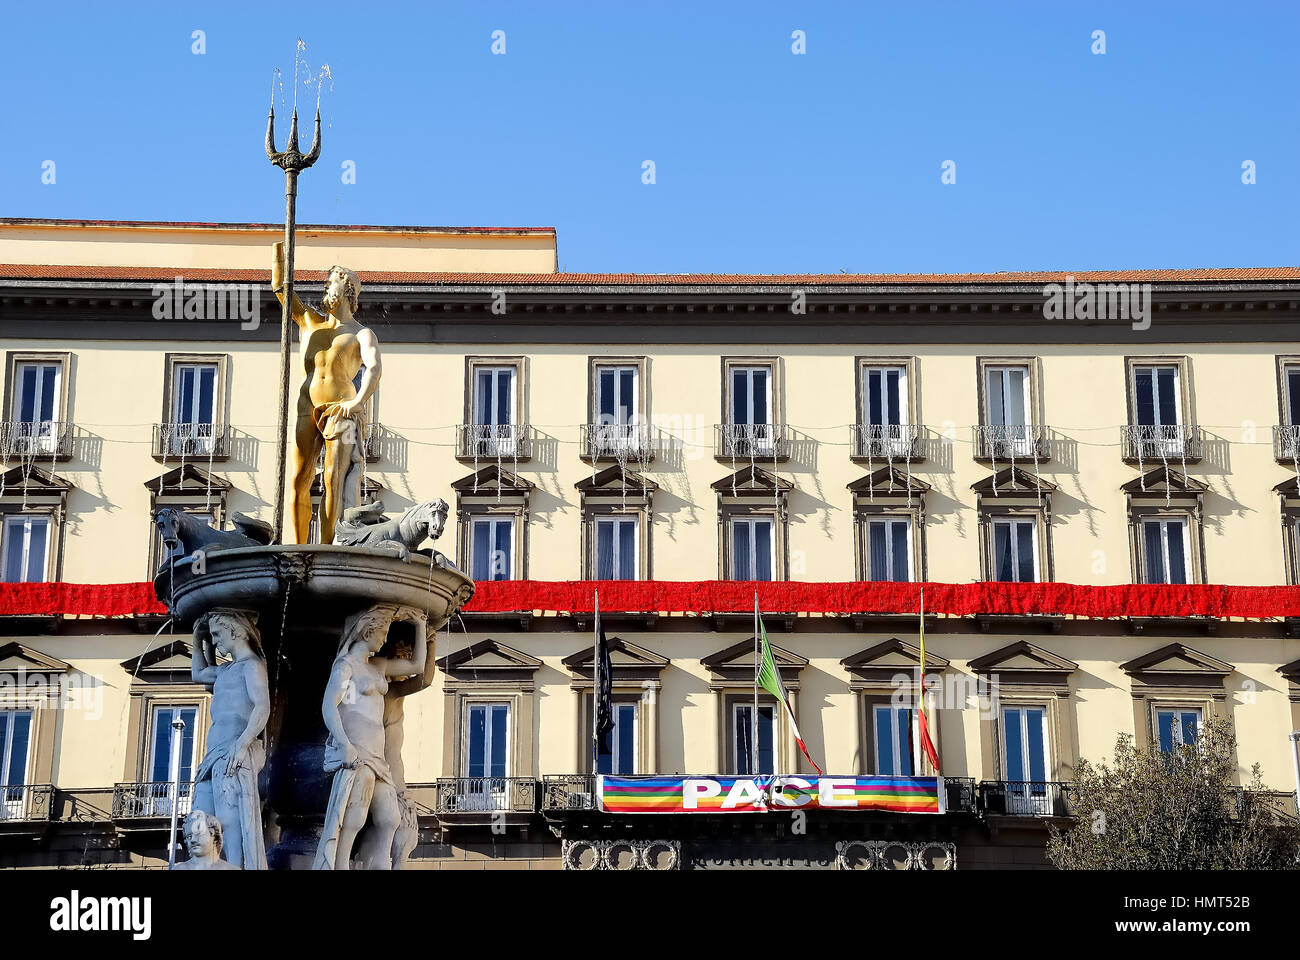 Naples, Italy. Piazza Municipio square. Palazzo San Giacomo, Naples Town Hall with the Peace flag and the seventeenth-century fountain of Neptune was built by the will of the Count Olivares, Enrique de Guzmán, on the direction of Domenico Fontana and with the collaboration of Michelangelo Naccherino, Angelo Landi and Pietro Bernini. Stock Photo